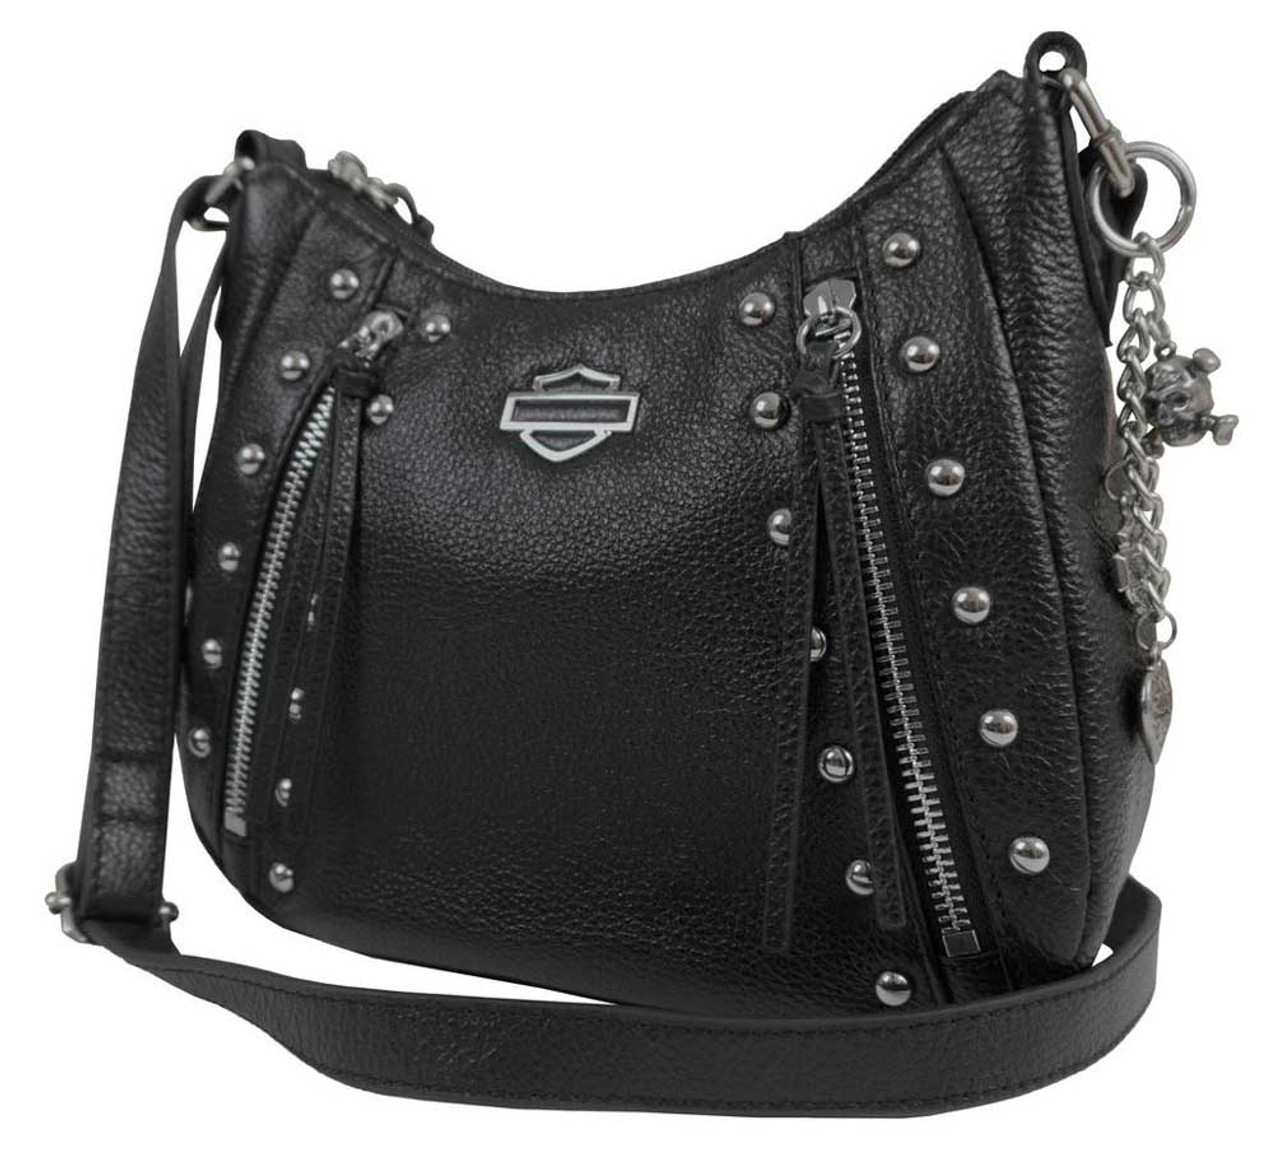 Harley Davidson purses - clothing & accessories - by owner - apparel sale -  craigslist